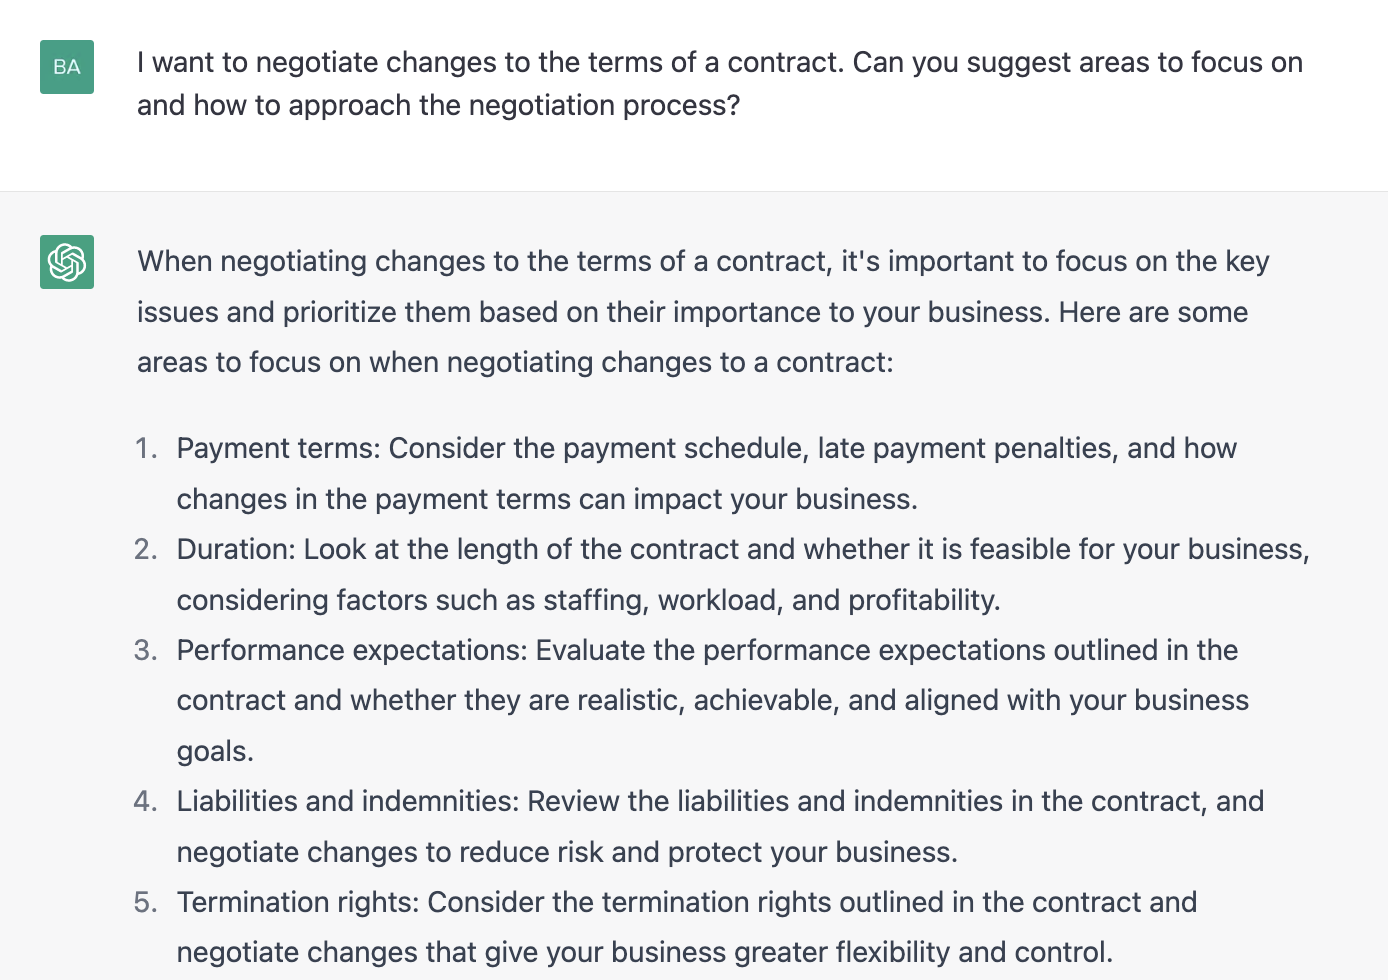 ChatGPT prompt about some areas to focus on negotiating changes to a contract